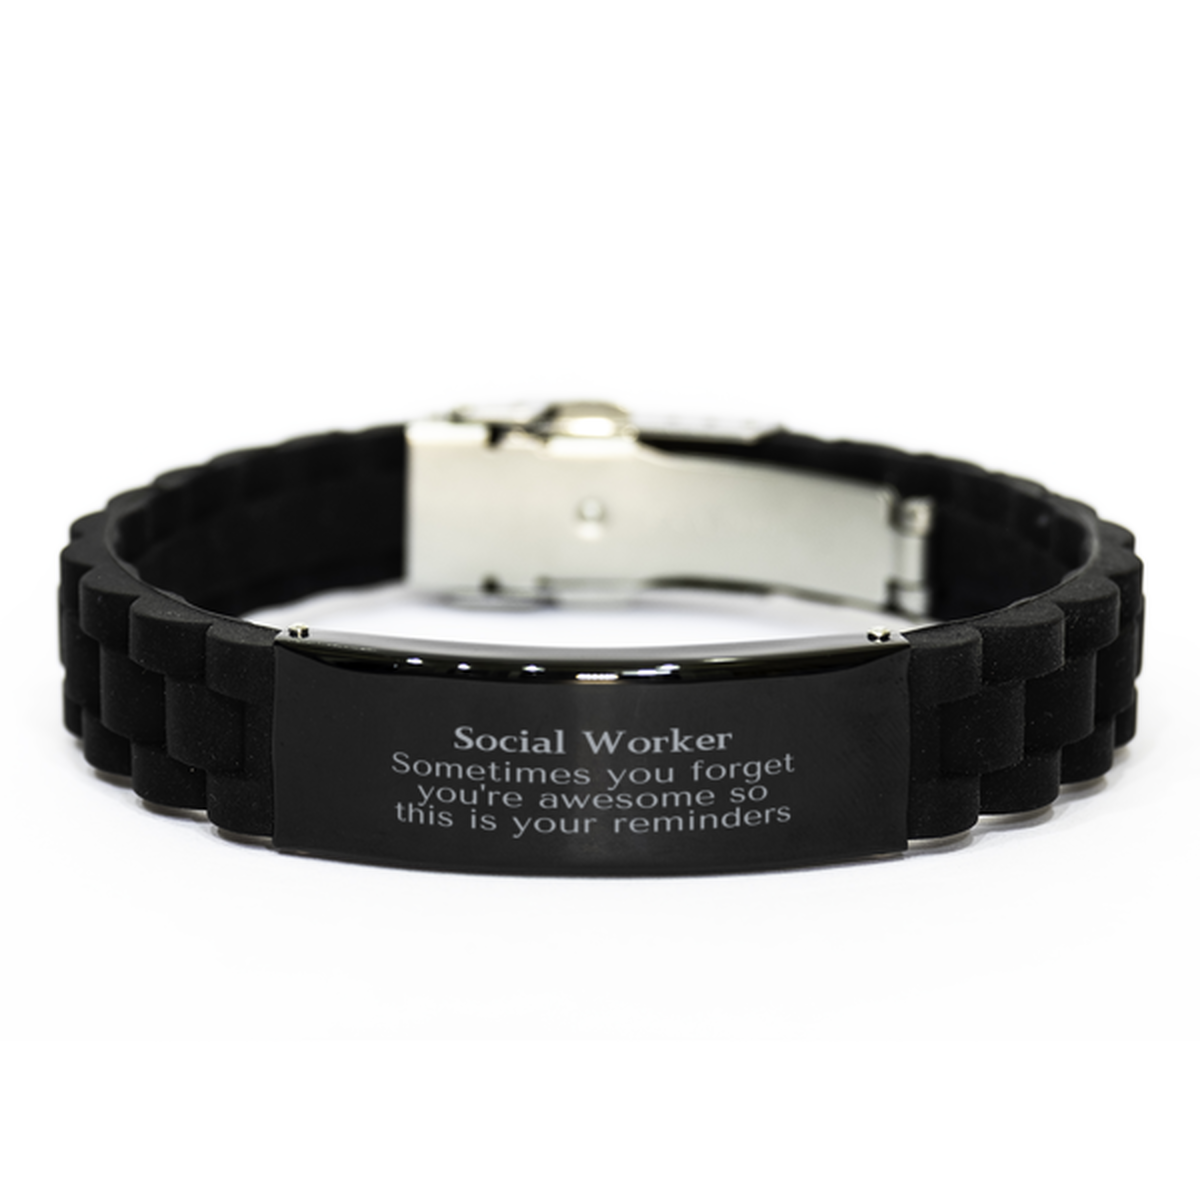 Sentimental Social Worker Black Glidelock Clasp Bracelet, Social Worker Sometimes you forget you're awesome so this is your reminders, Graduation Christmas Birthday Gifts for Social Worker, Men, Women, Coworkers